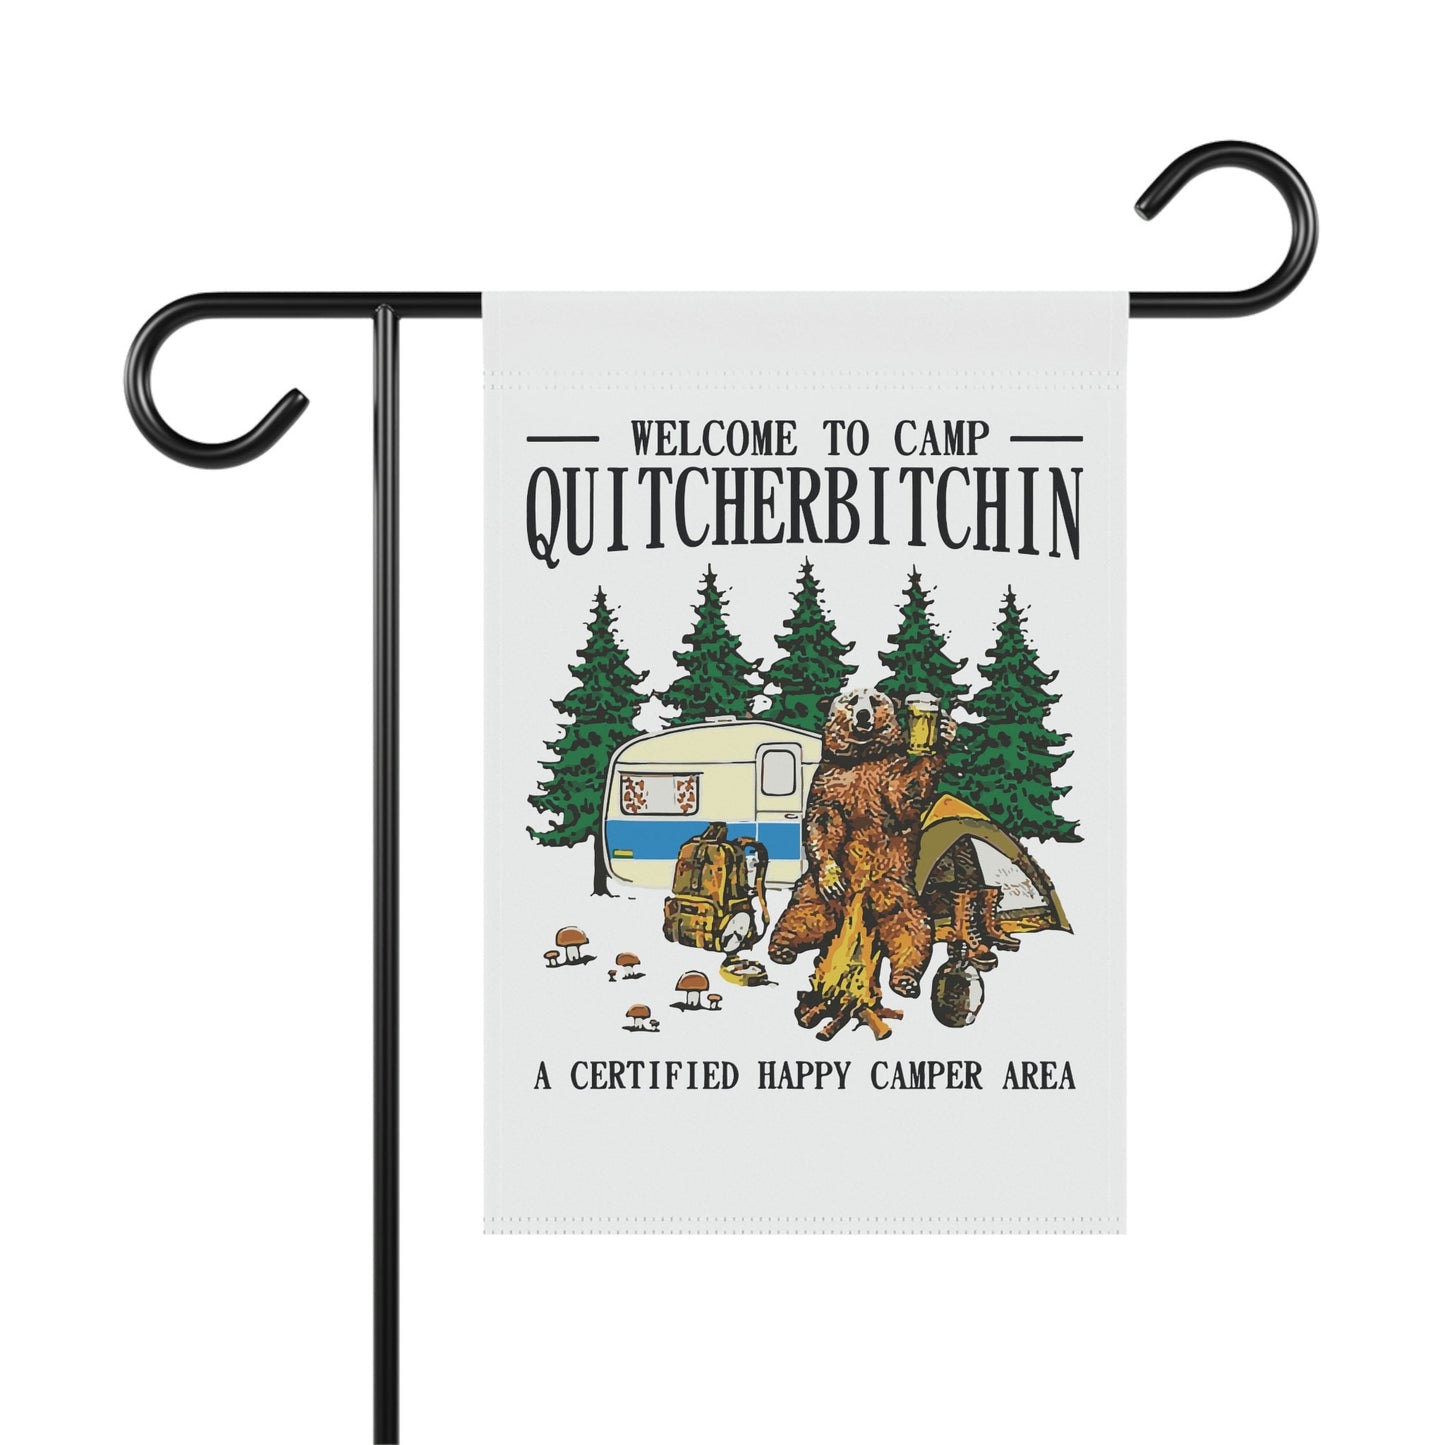 Welcome to Camp Quitcherbitchin Camping, Garden and House flag (excludes pole)